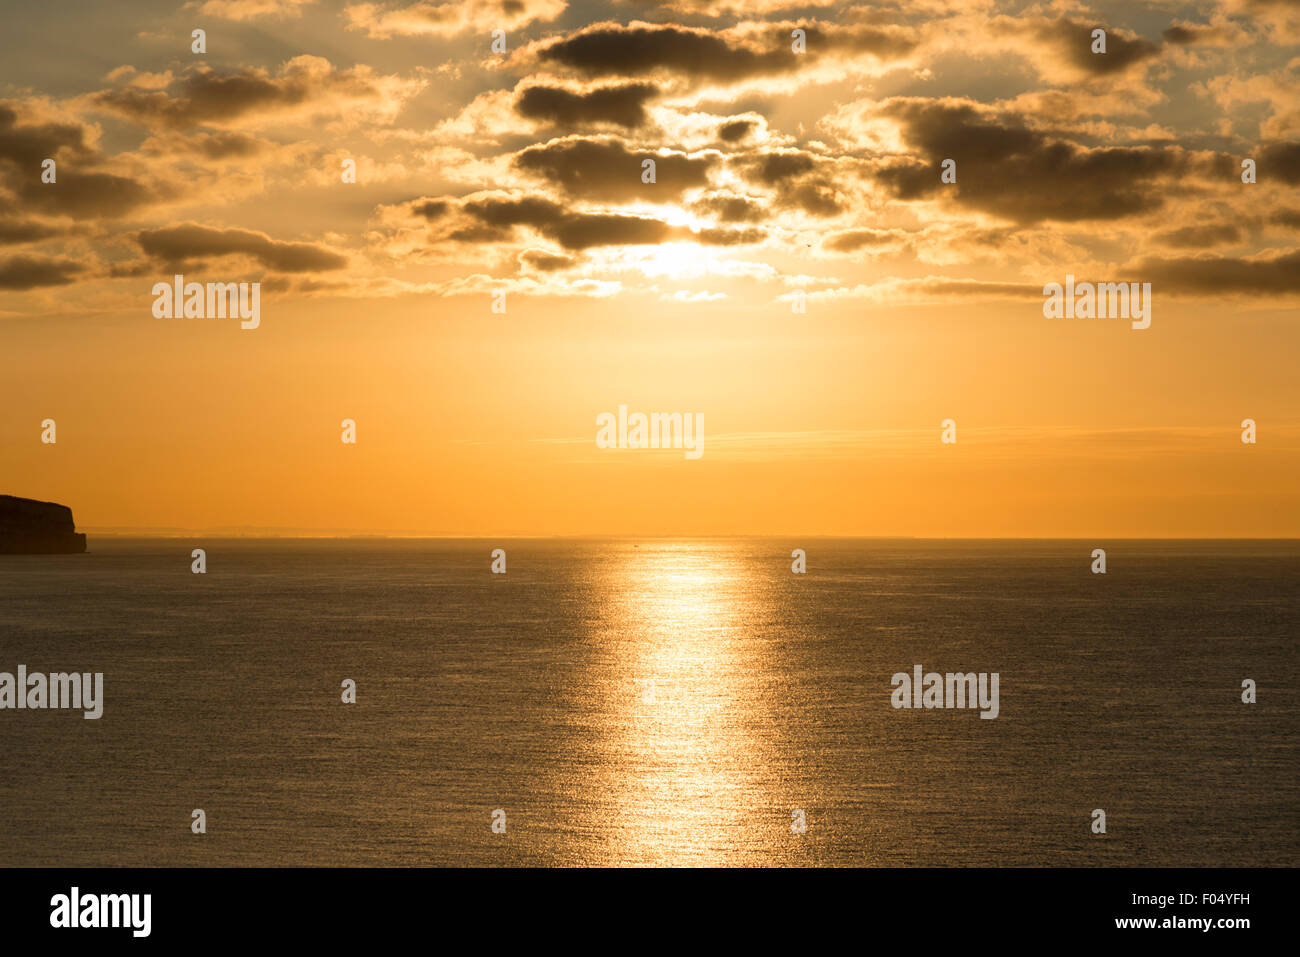 Isle of Wight, 7th August 2015. A beautiful sunrise at Sandown, looking across the Solent. The forecast is for a sunny day across much of the UK with warmer weather over the coming weekend after the recent cool spell. Credit Julian Eales/Alamy Live News Stock Photo